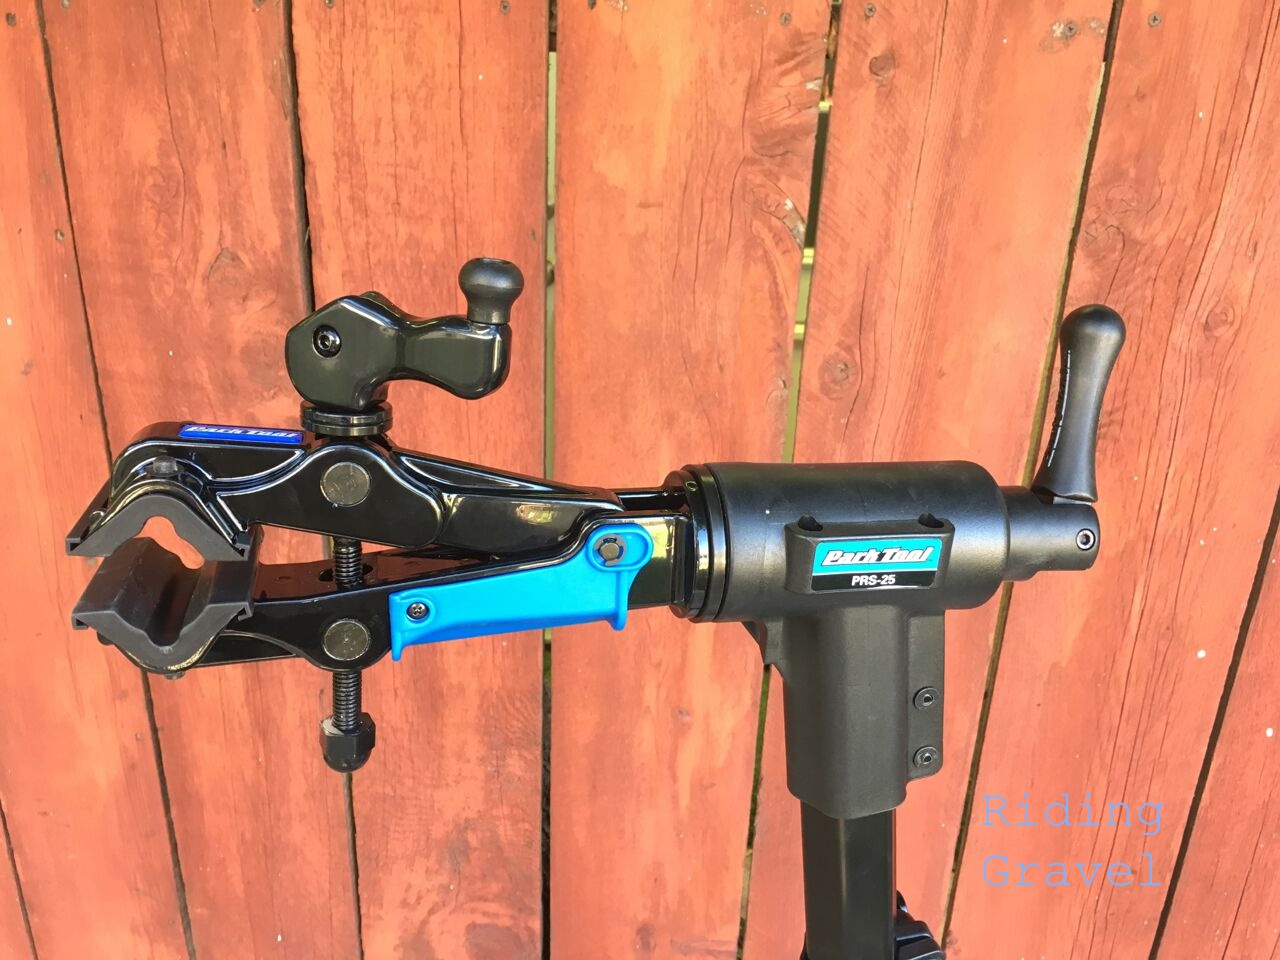 Park Tool PRS-25 Team Issue Repair Stand: Quick Review - Riding Gravel